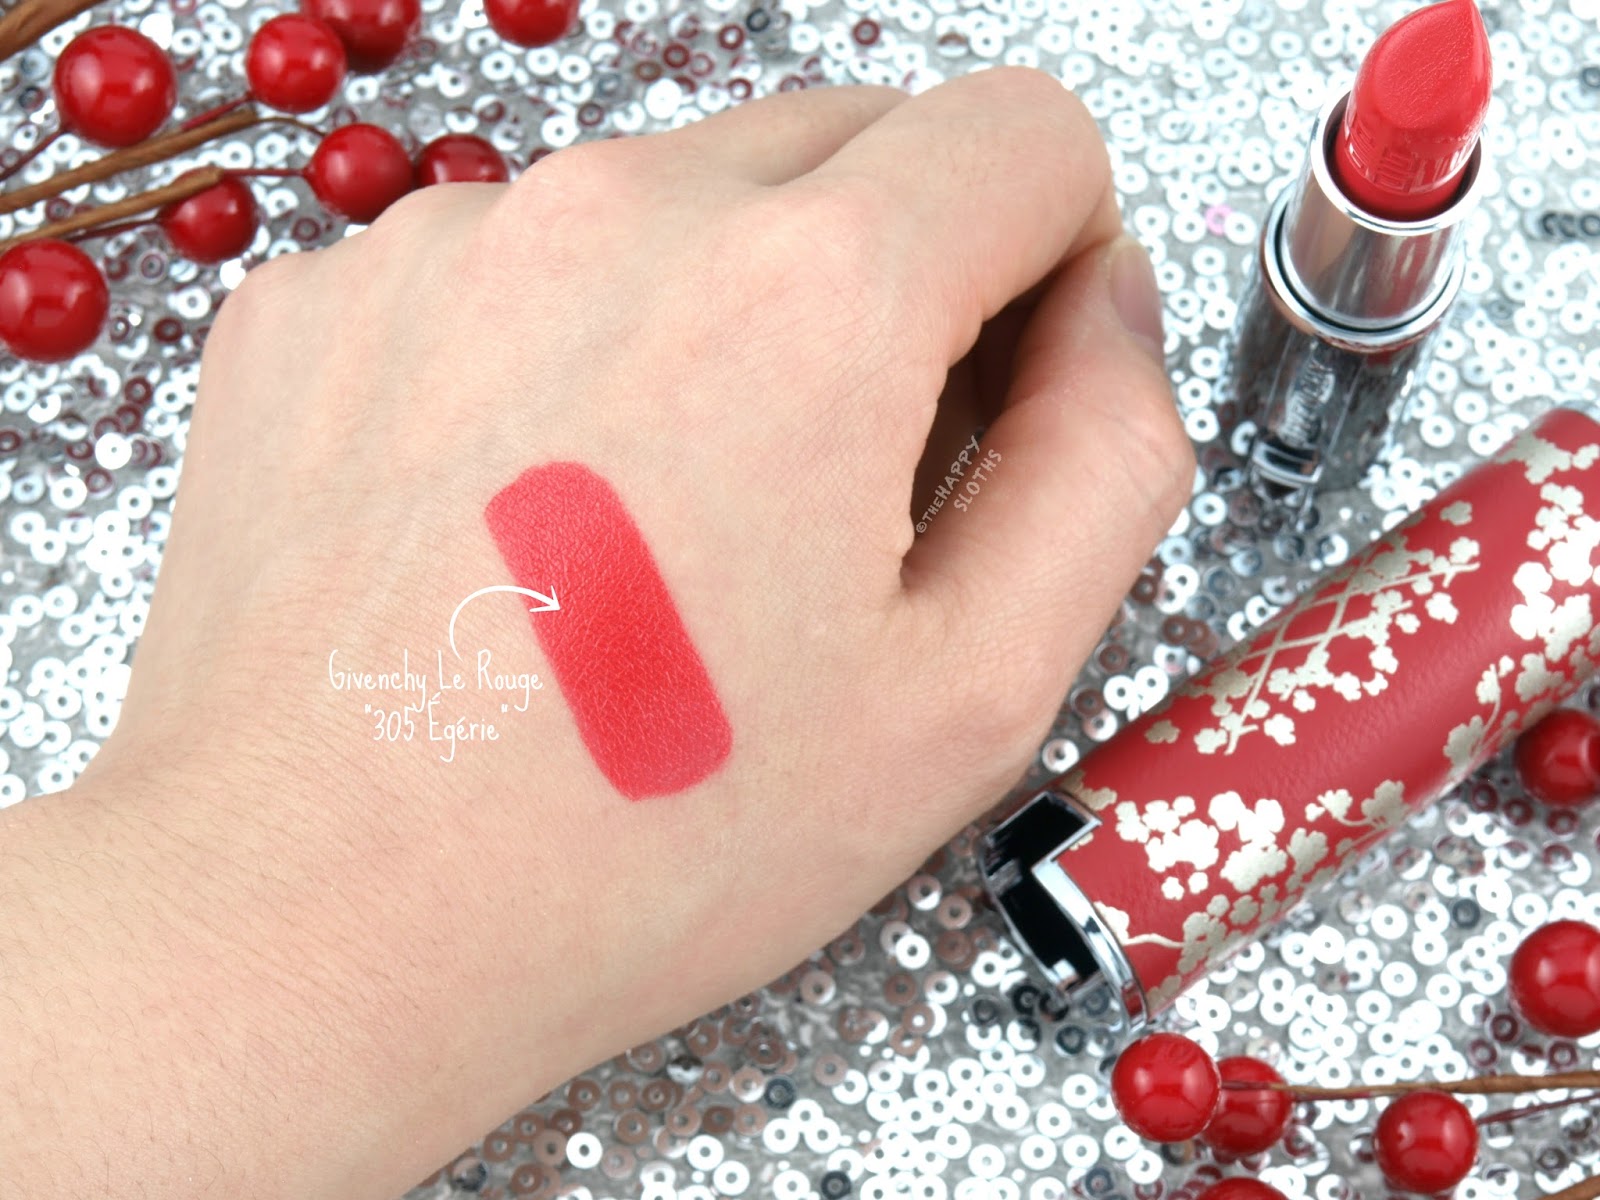 Givenchy Lunar New Year 2018 | Le Rouge Lipstick in "305 Egerie": Review and Swatches